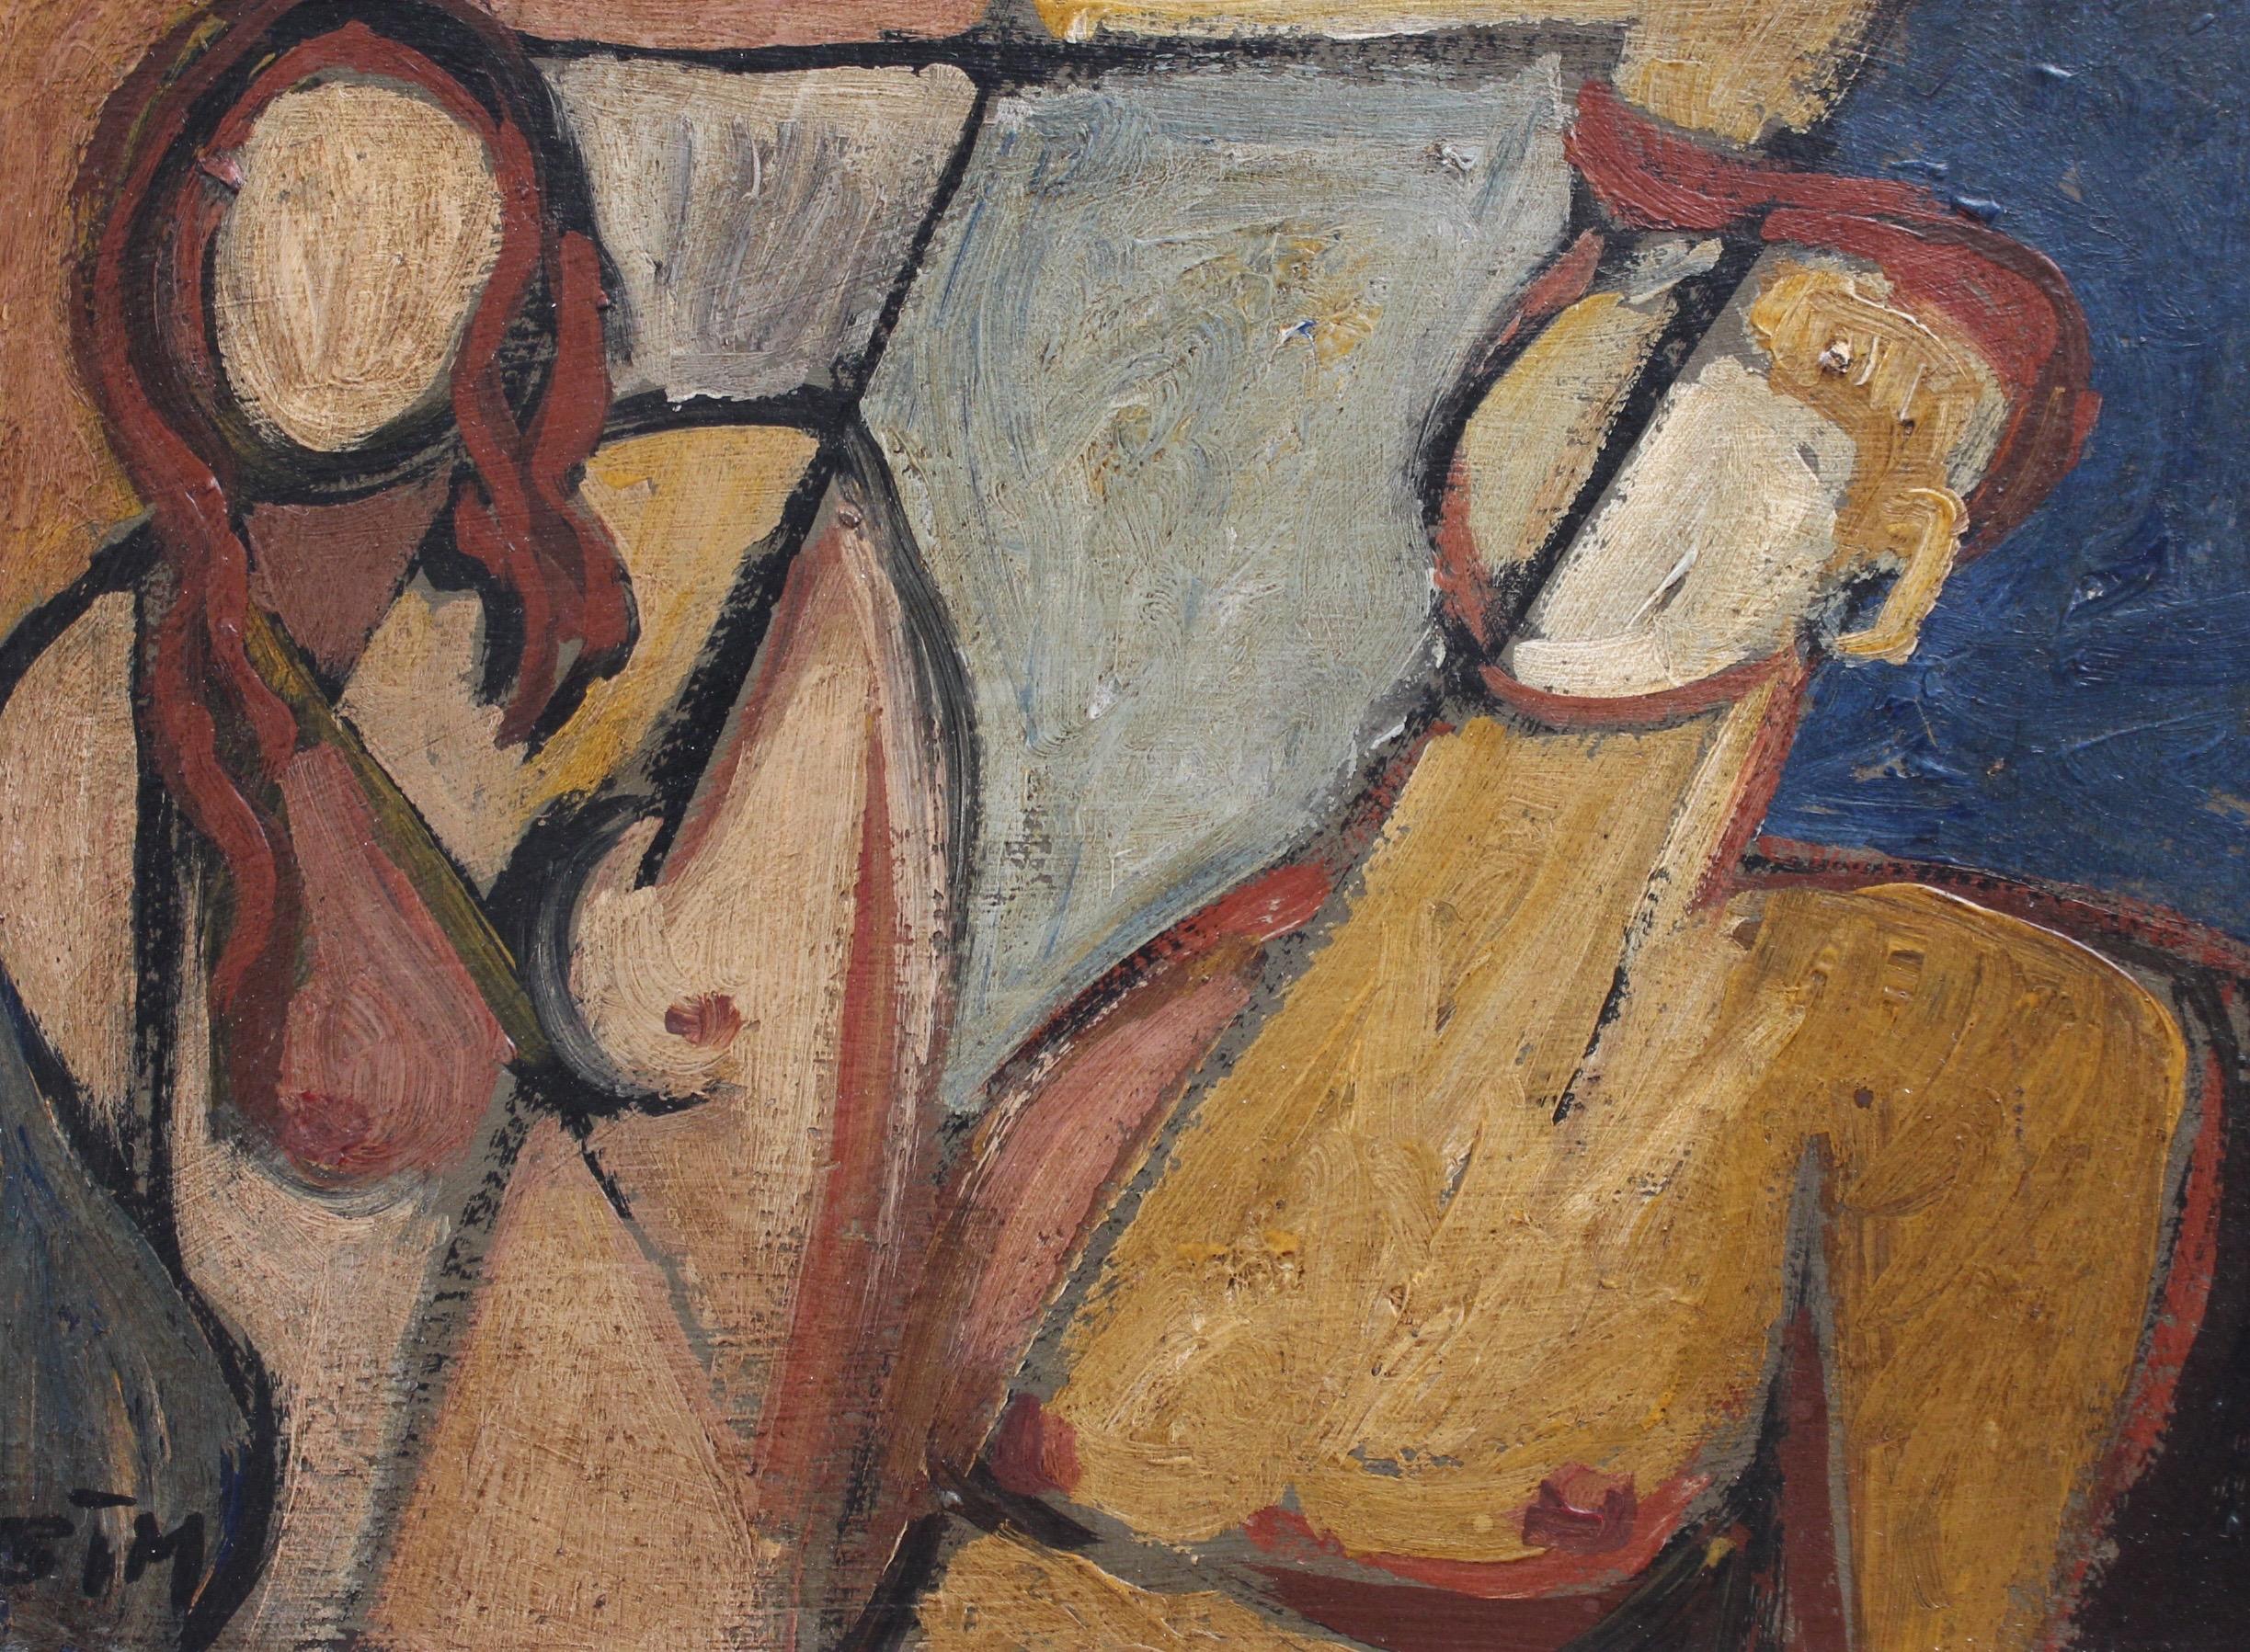 'Portrait of Man and Woman', oil on board, by artist with the initials STM (c. 1940s - 1960s). A very impressive cubist depiction of a portrait of a young man and woman in angled perspective. The facial features are simply lines and colour with hues